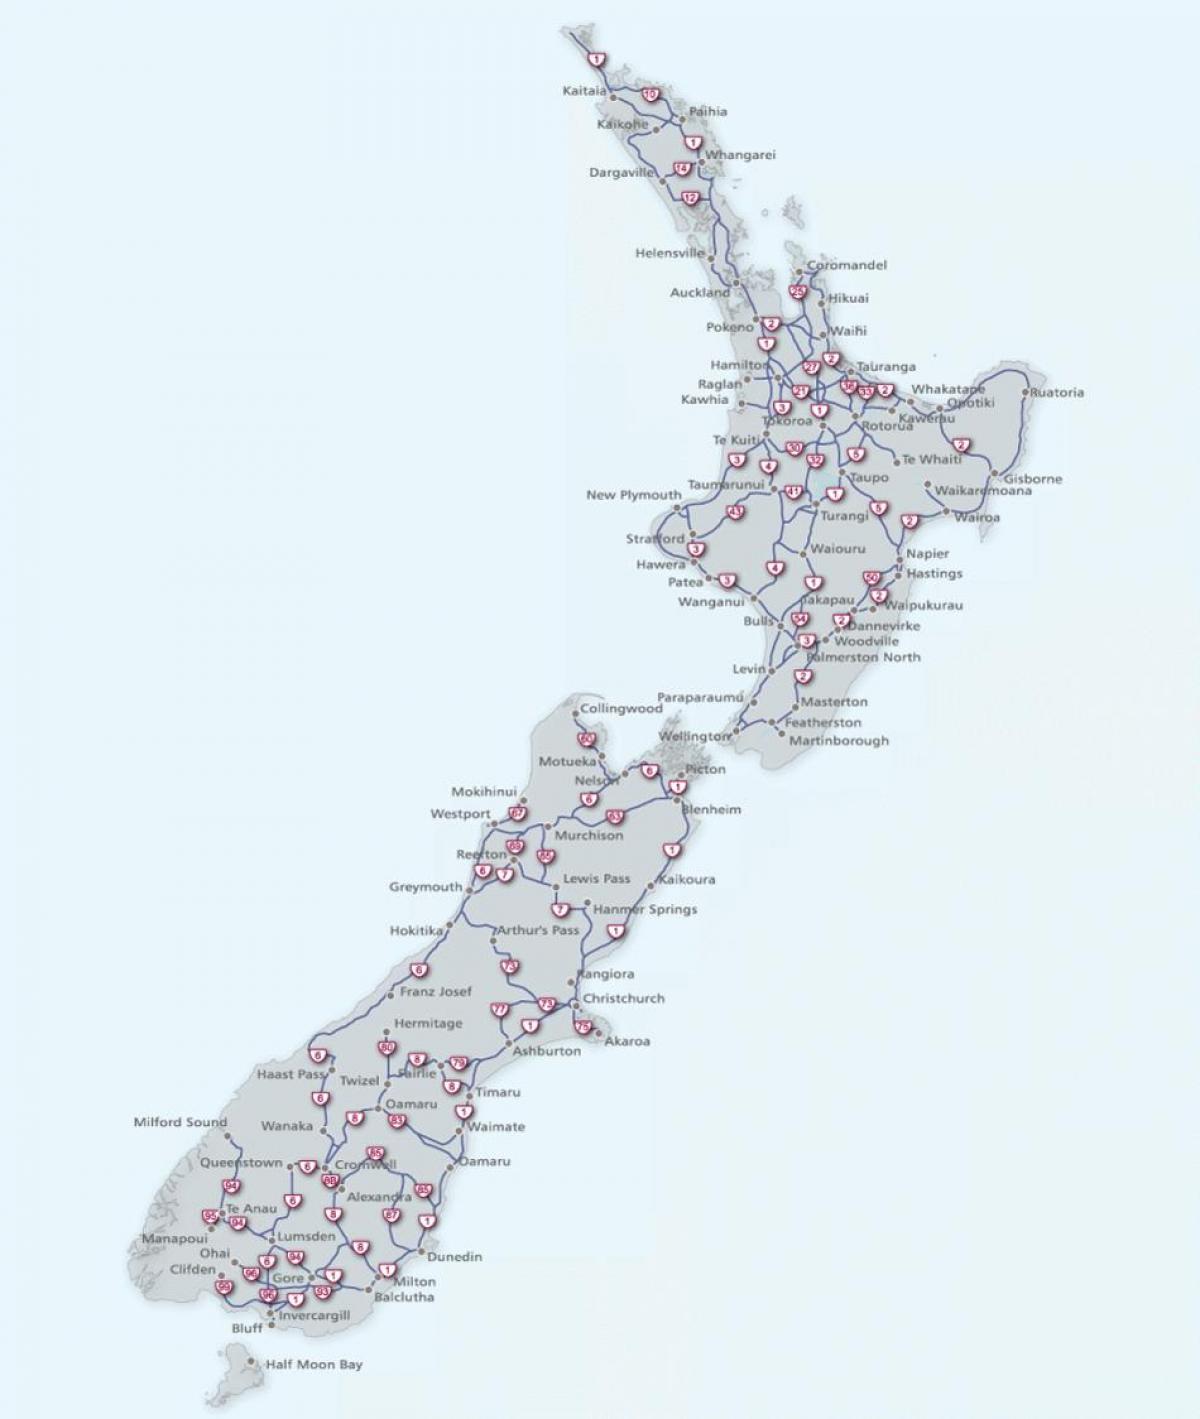 Driving map of New Zealand